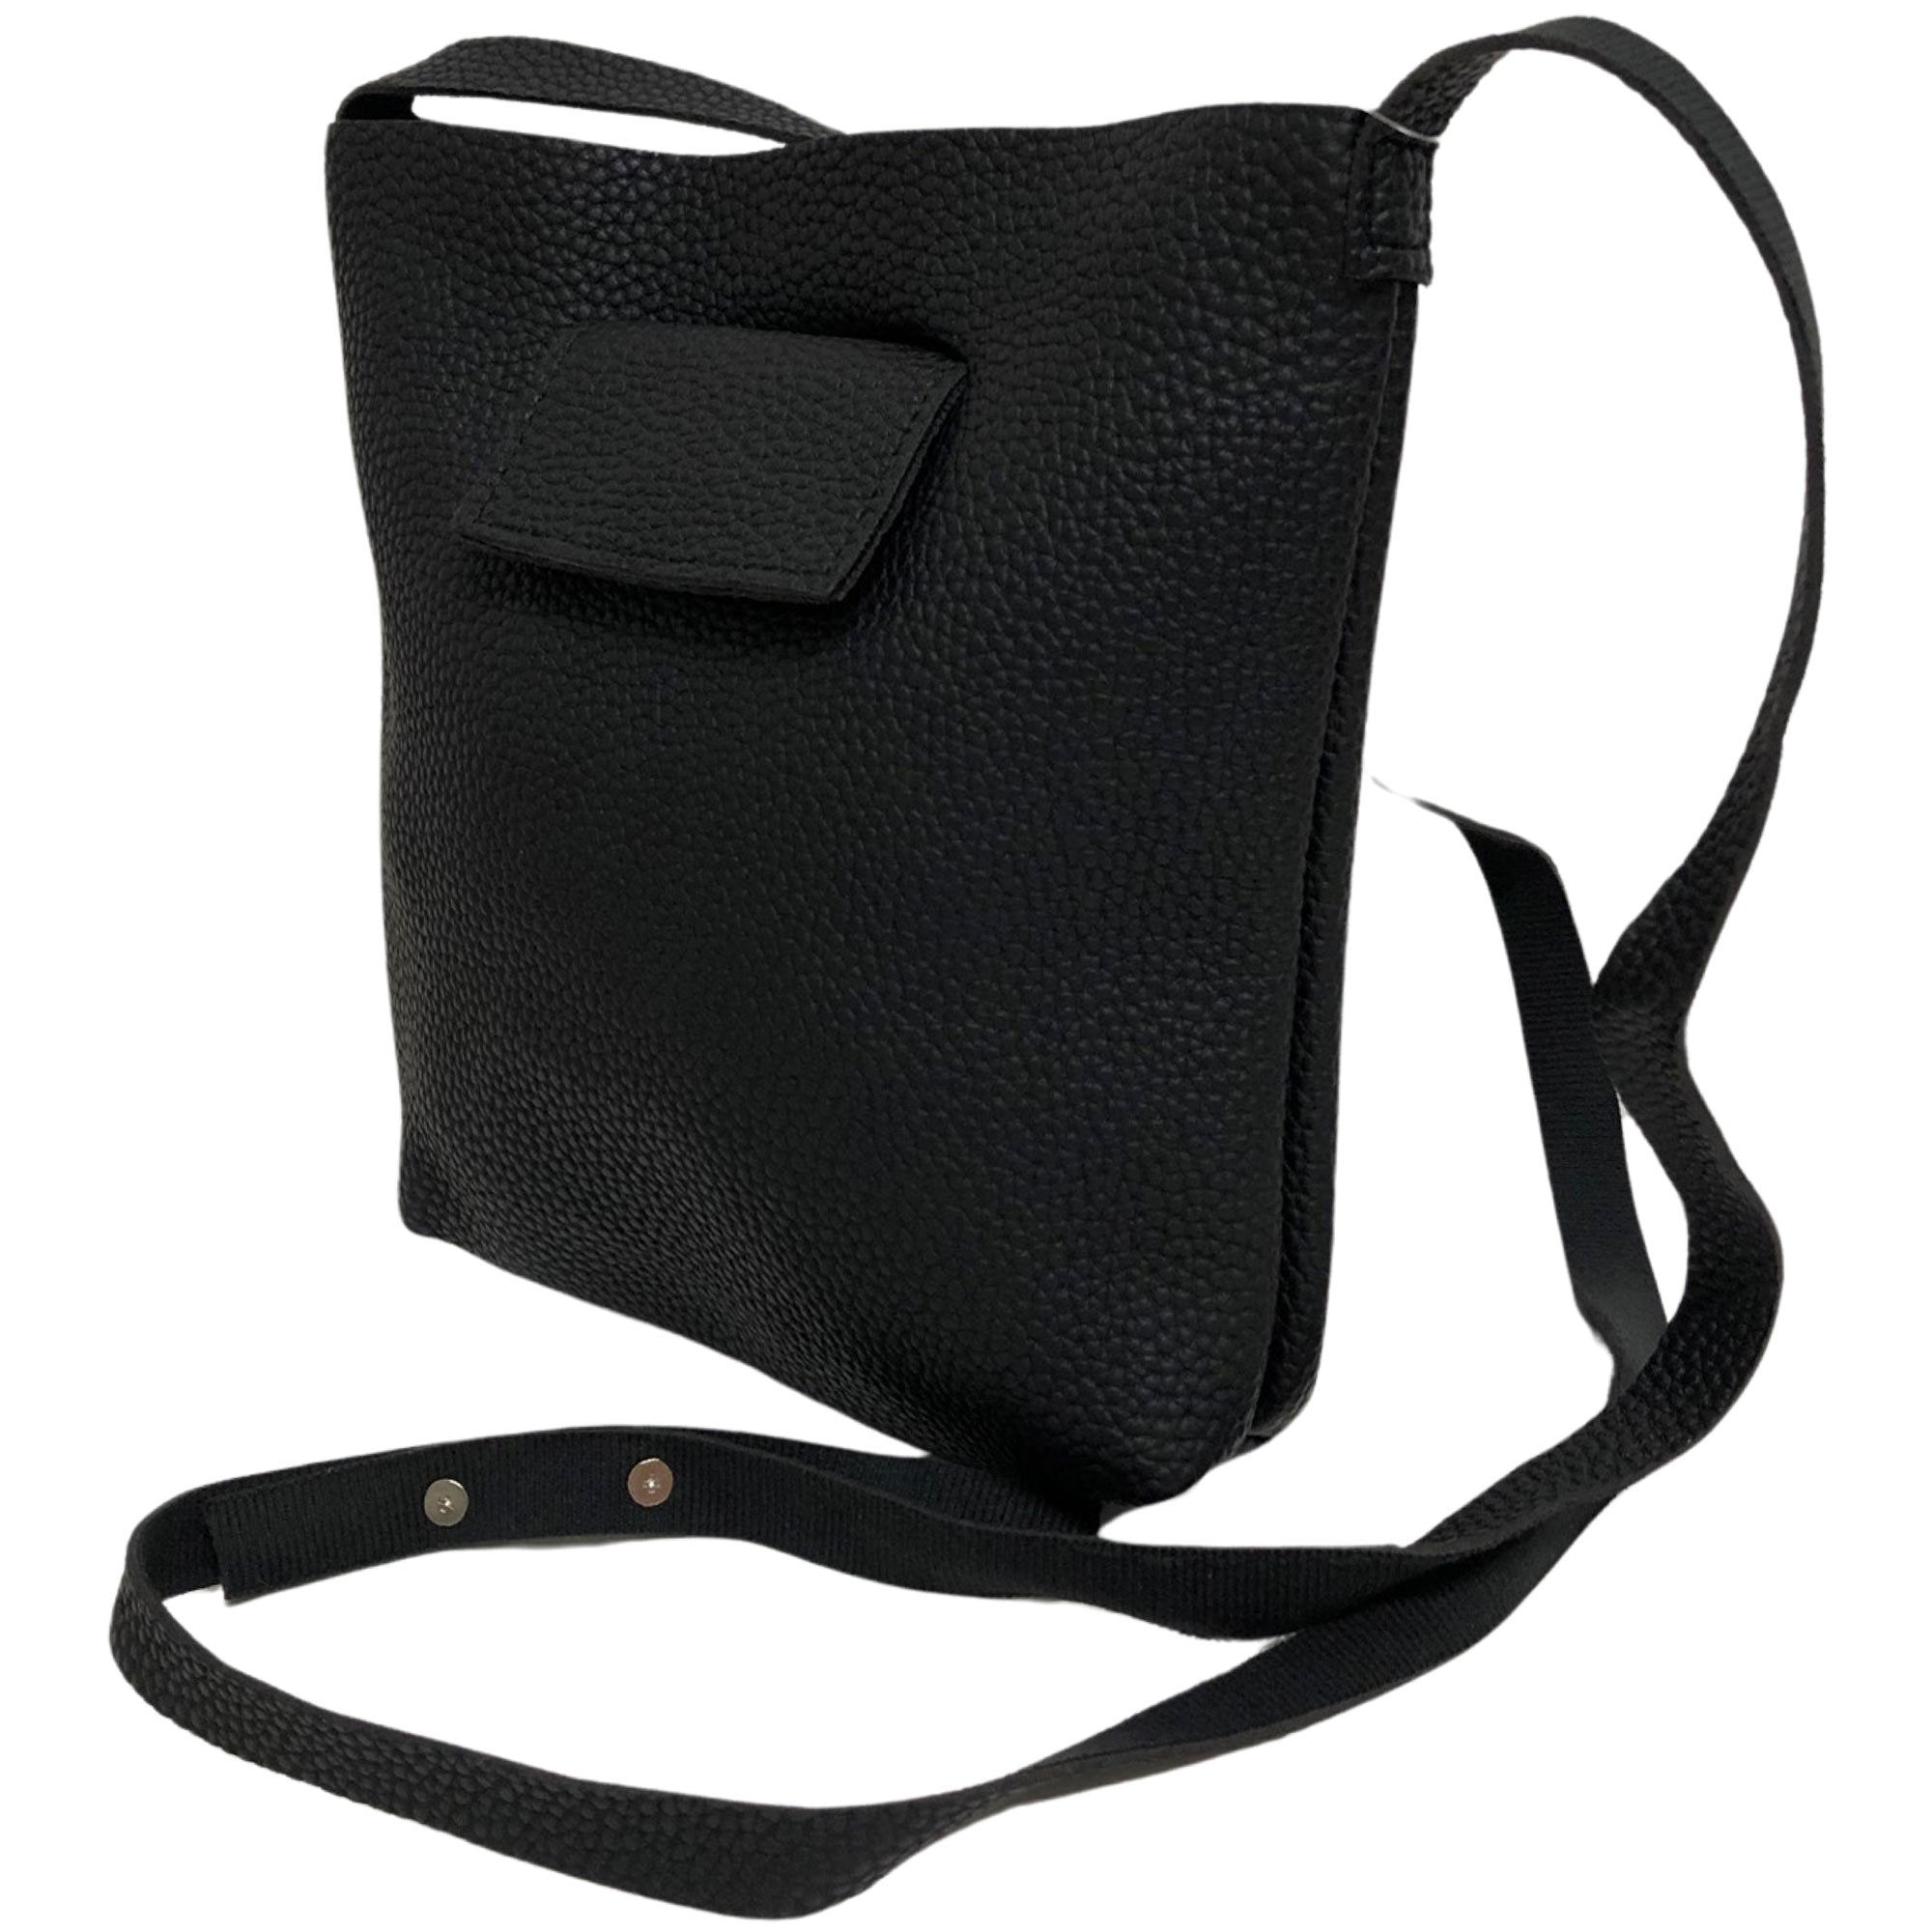 CLEARANCE CROSSBODY BAG FOR WOMEN (CASE OF 48 - $1.75 / PIECE)  Assorted Color Wholesale Crossbody Bag SKU: 336-DK-48